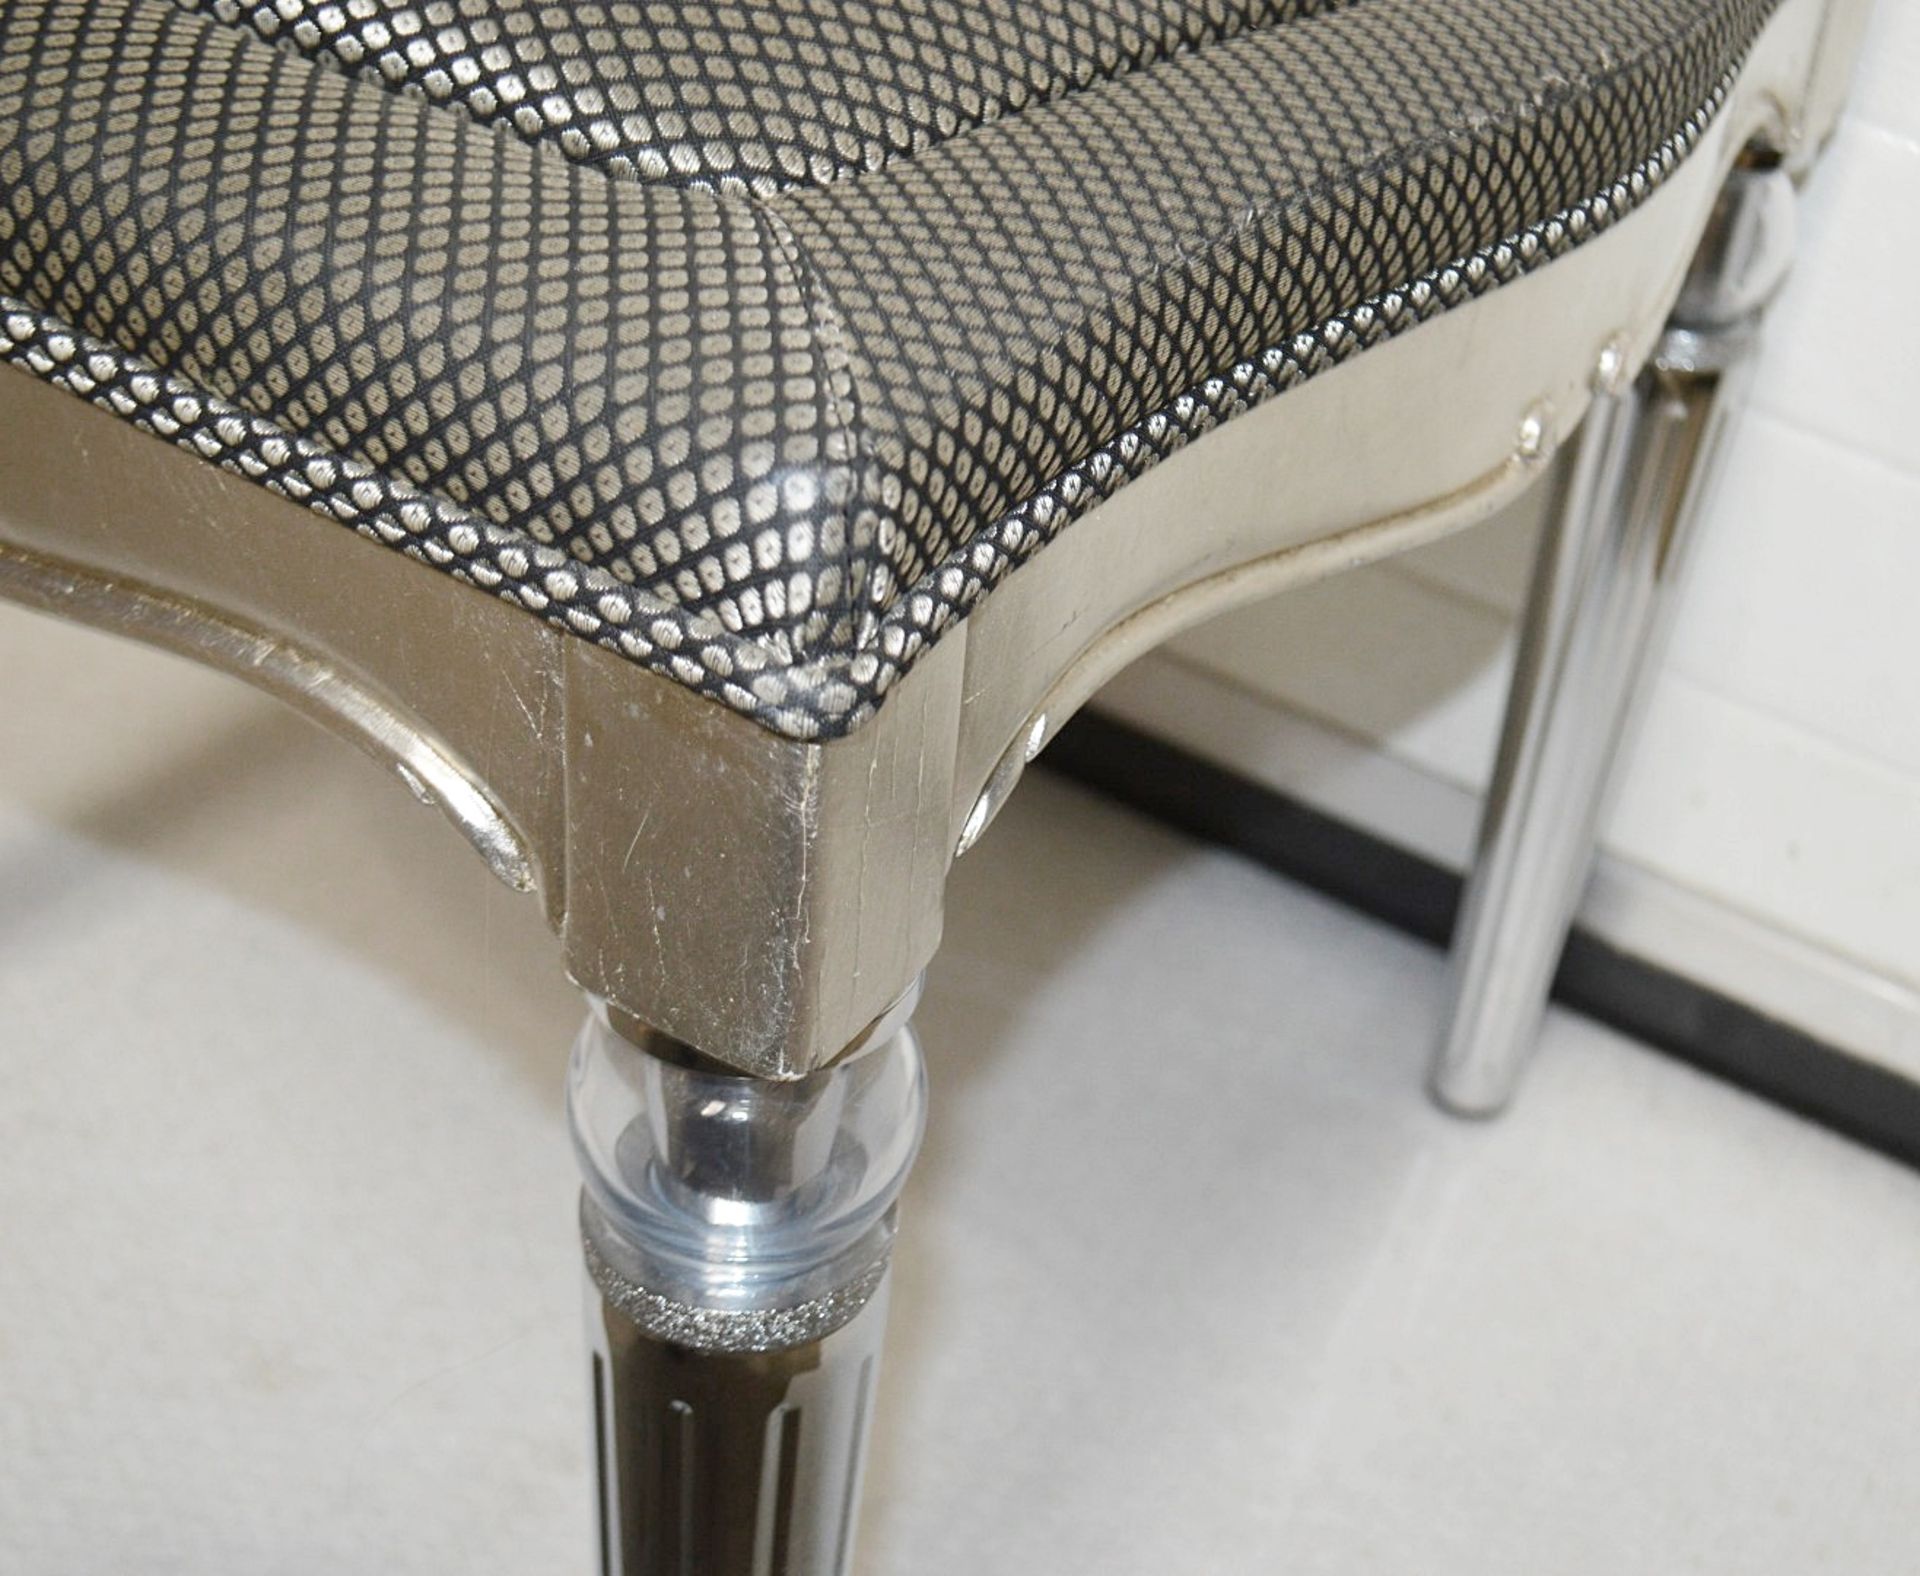 1 x Luxurious Designer Chair In Silver With Upholstered Seat And Ornate Legs - Dimensions: H72 x - Image 9 of 12